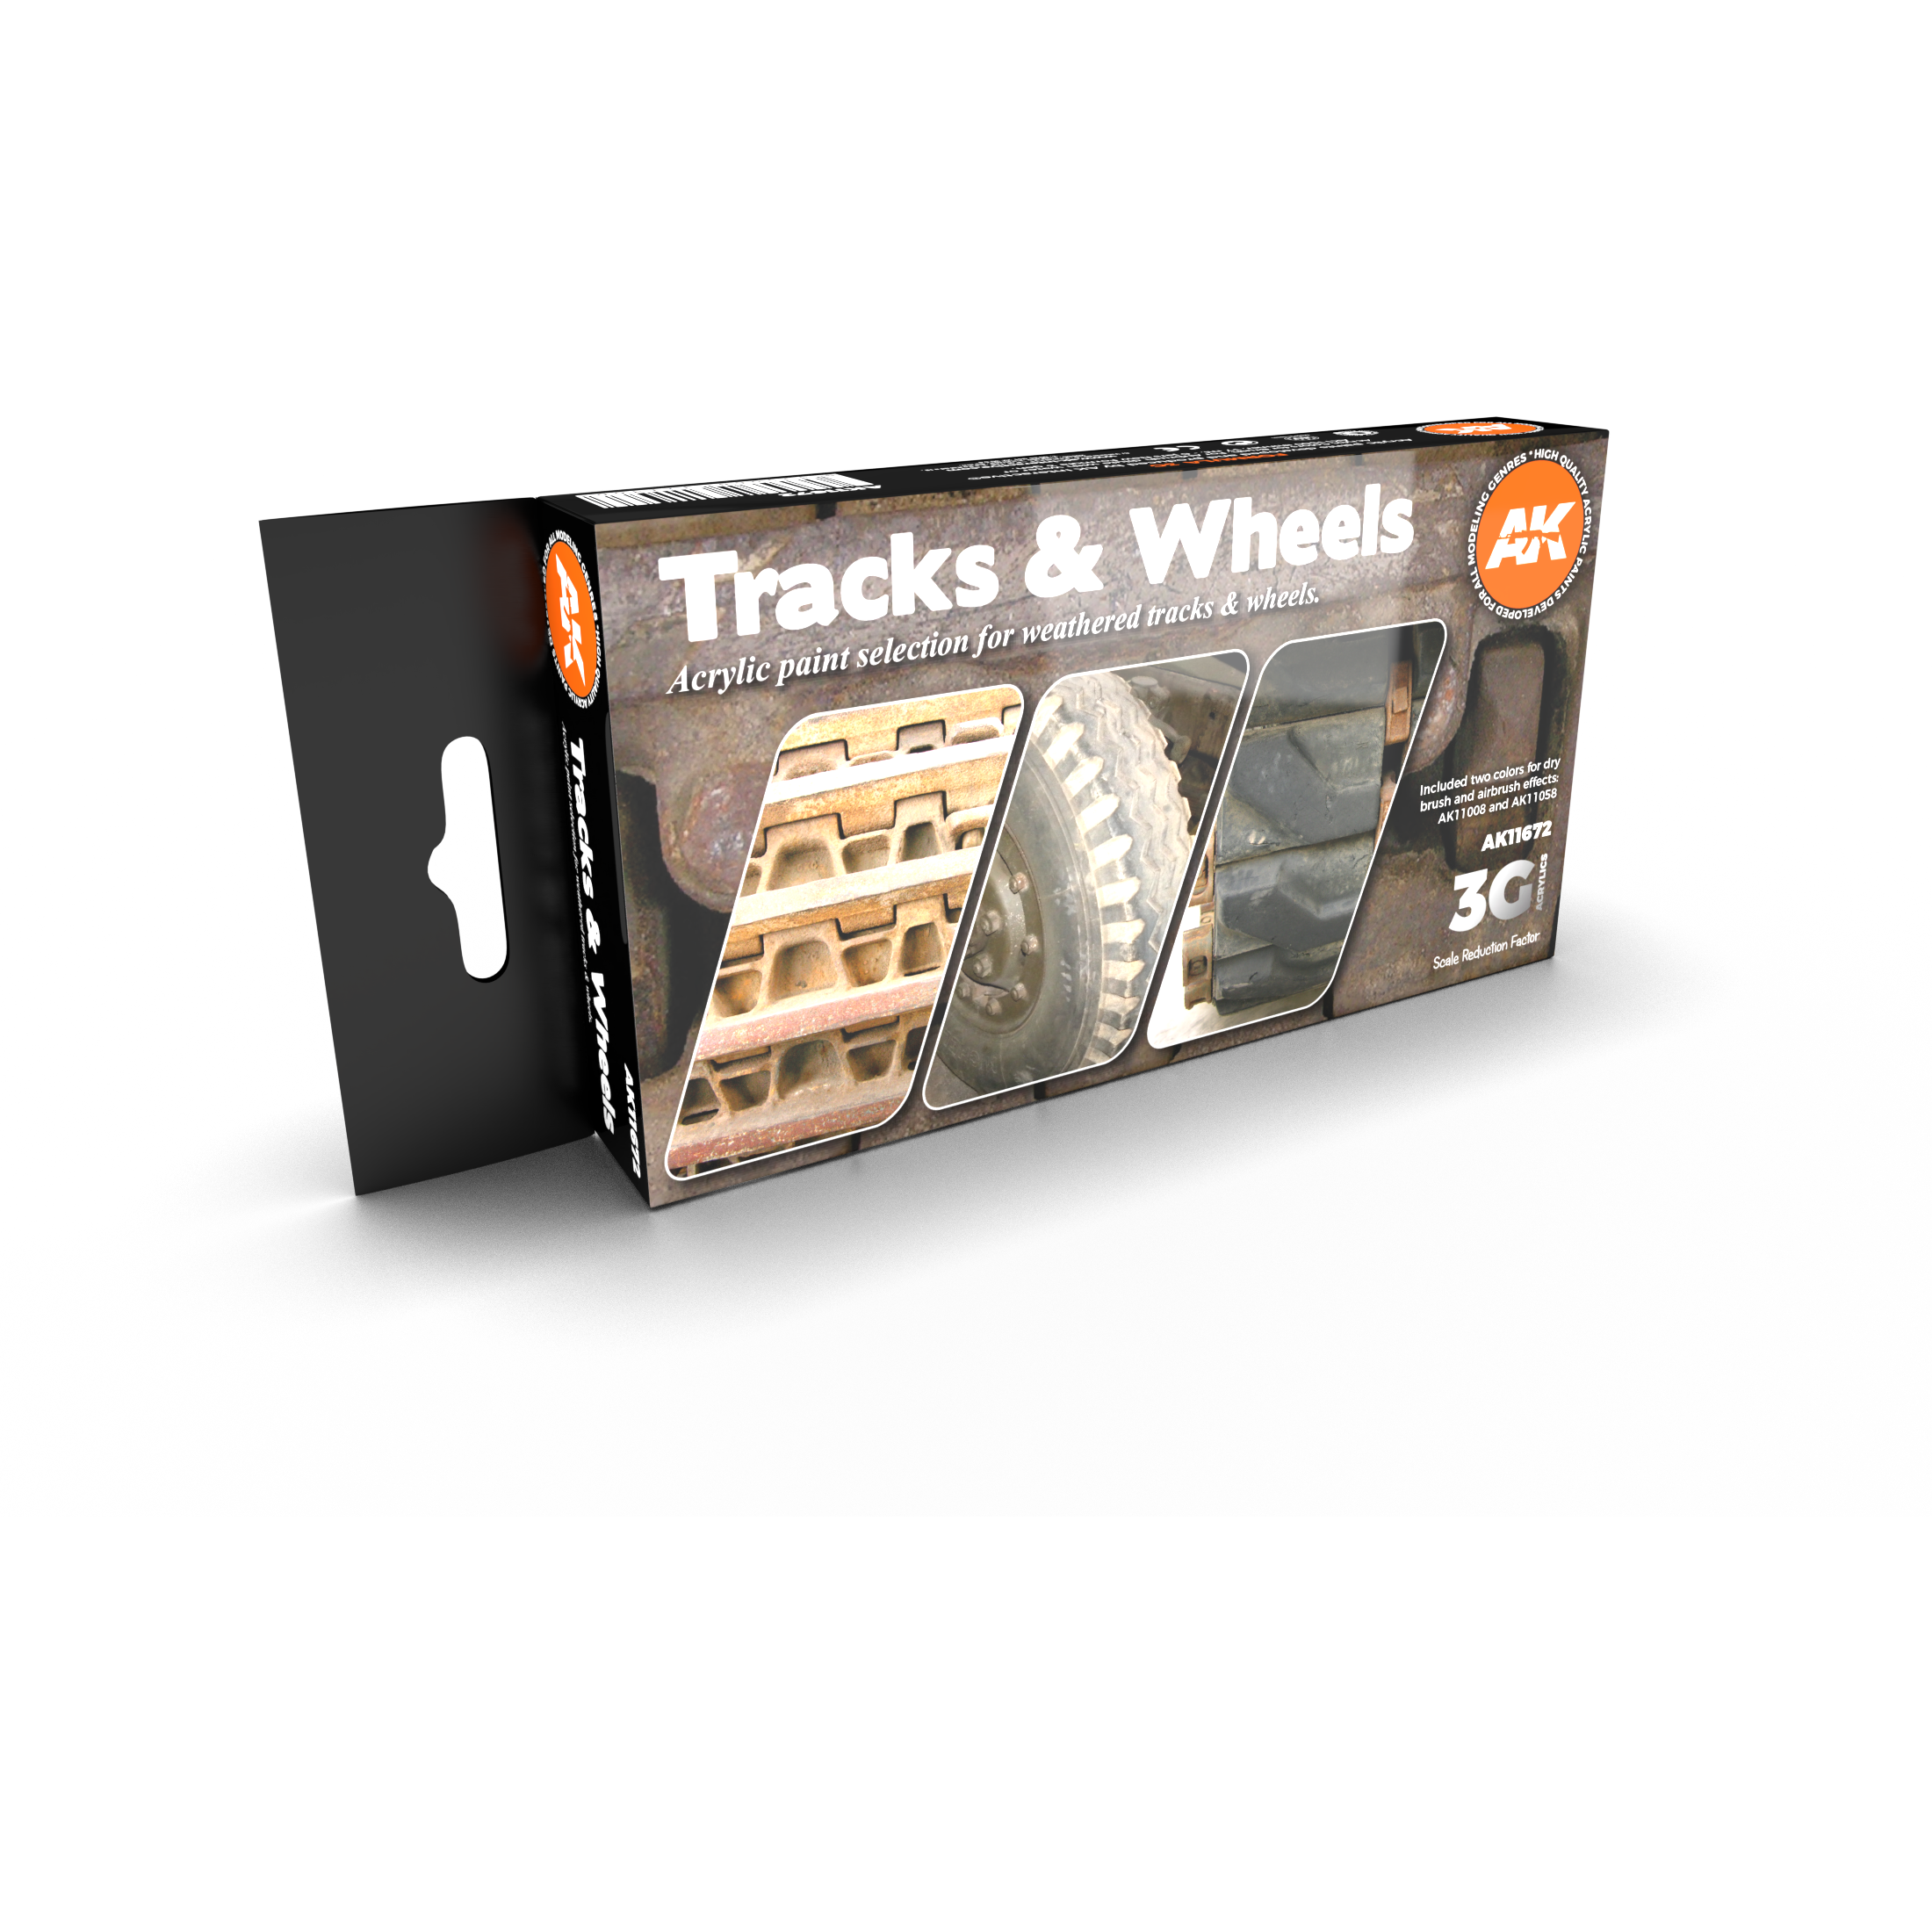 AK Interactive Paint Set 3G Tracks And Wheels